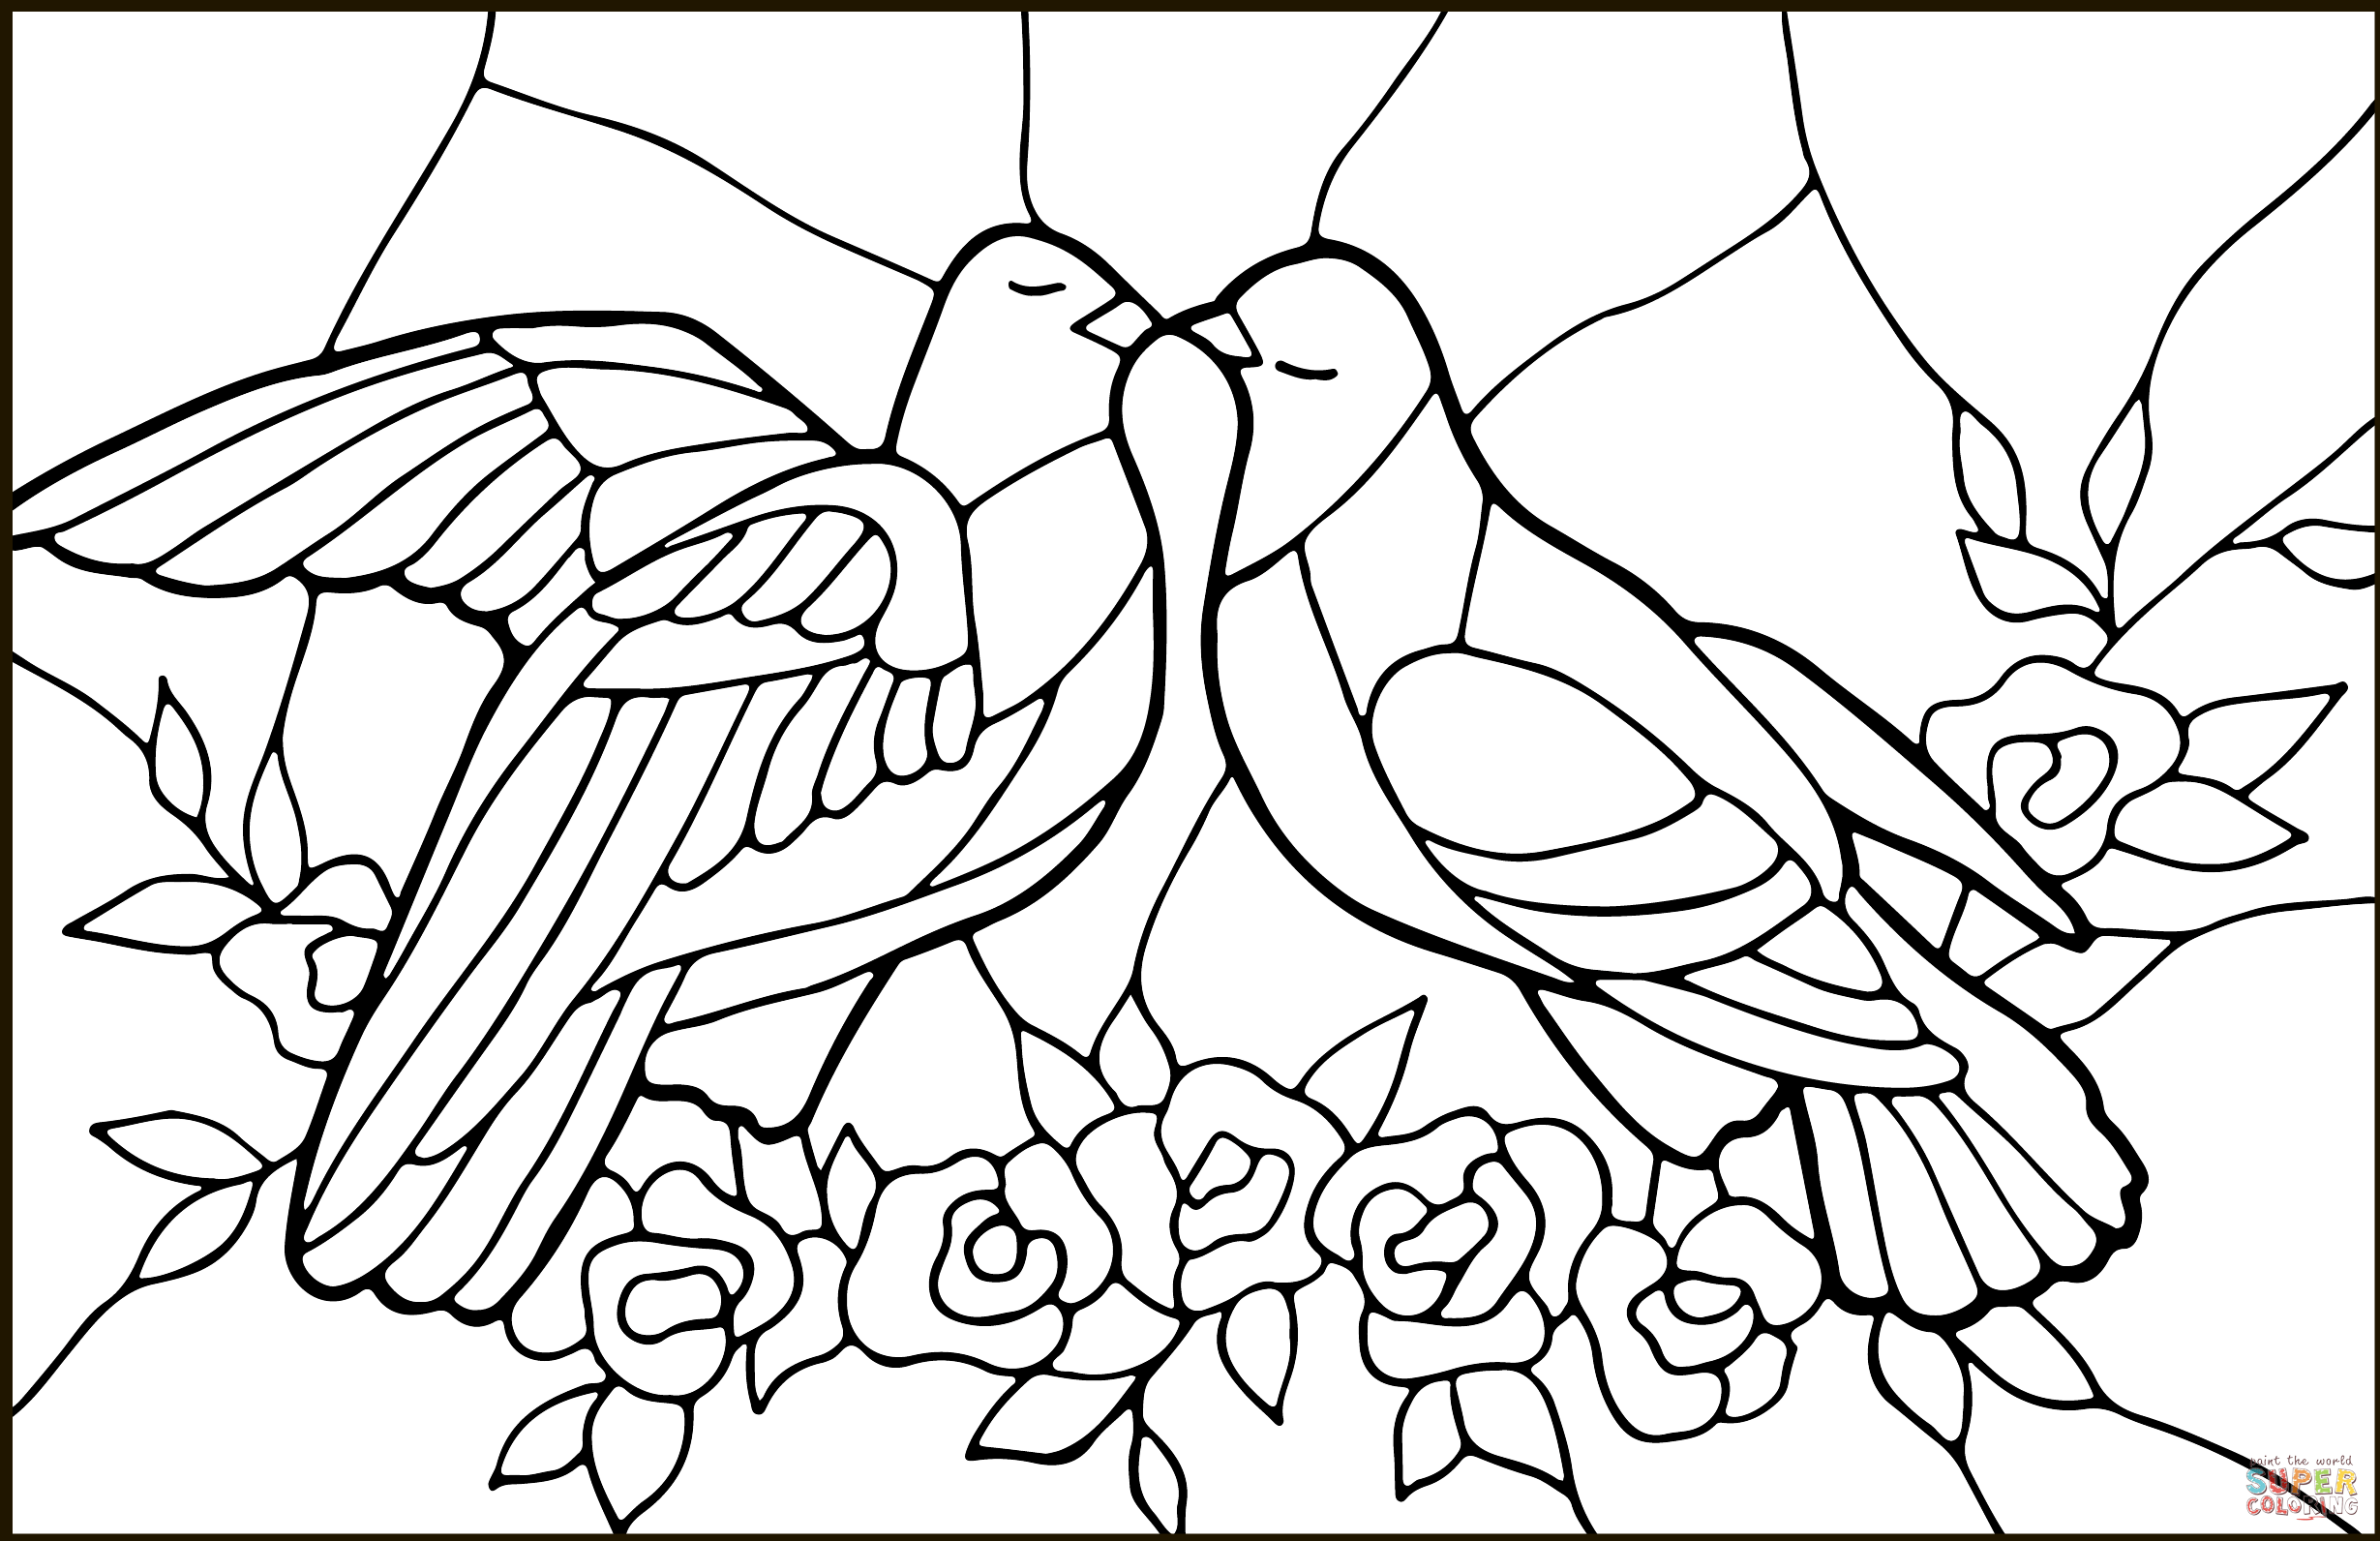 Doves stained glass coloring page free printable coloring pages